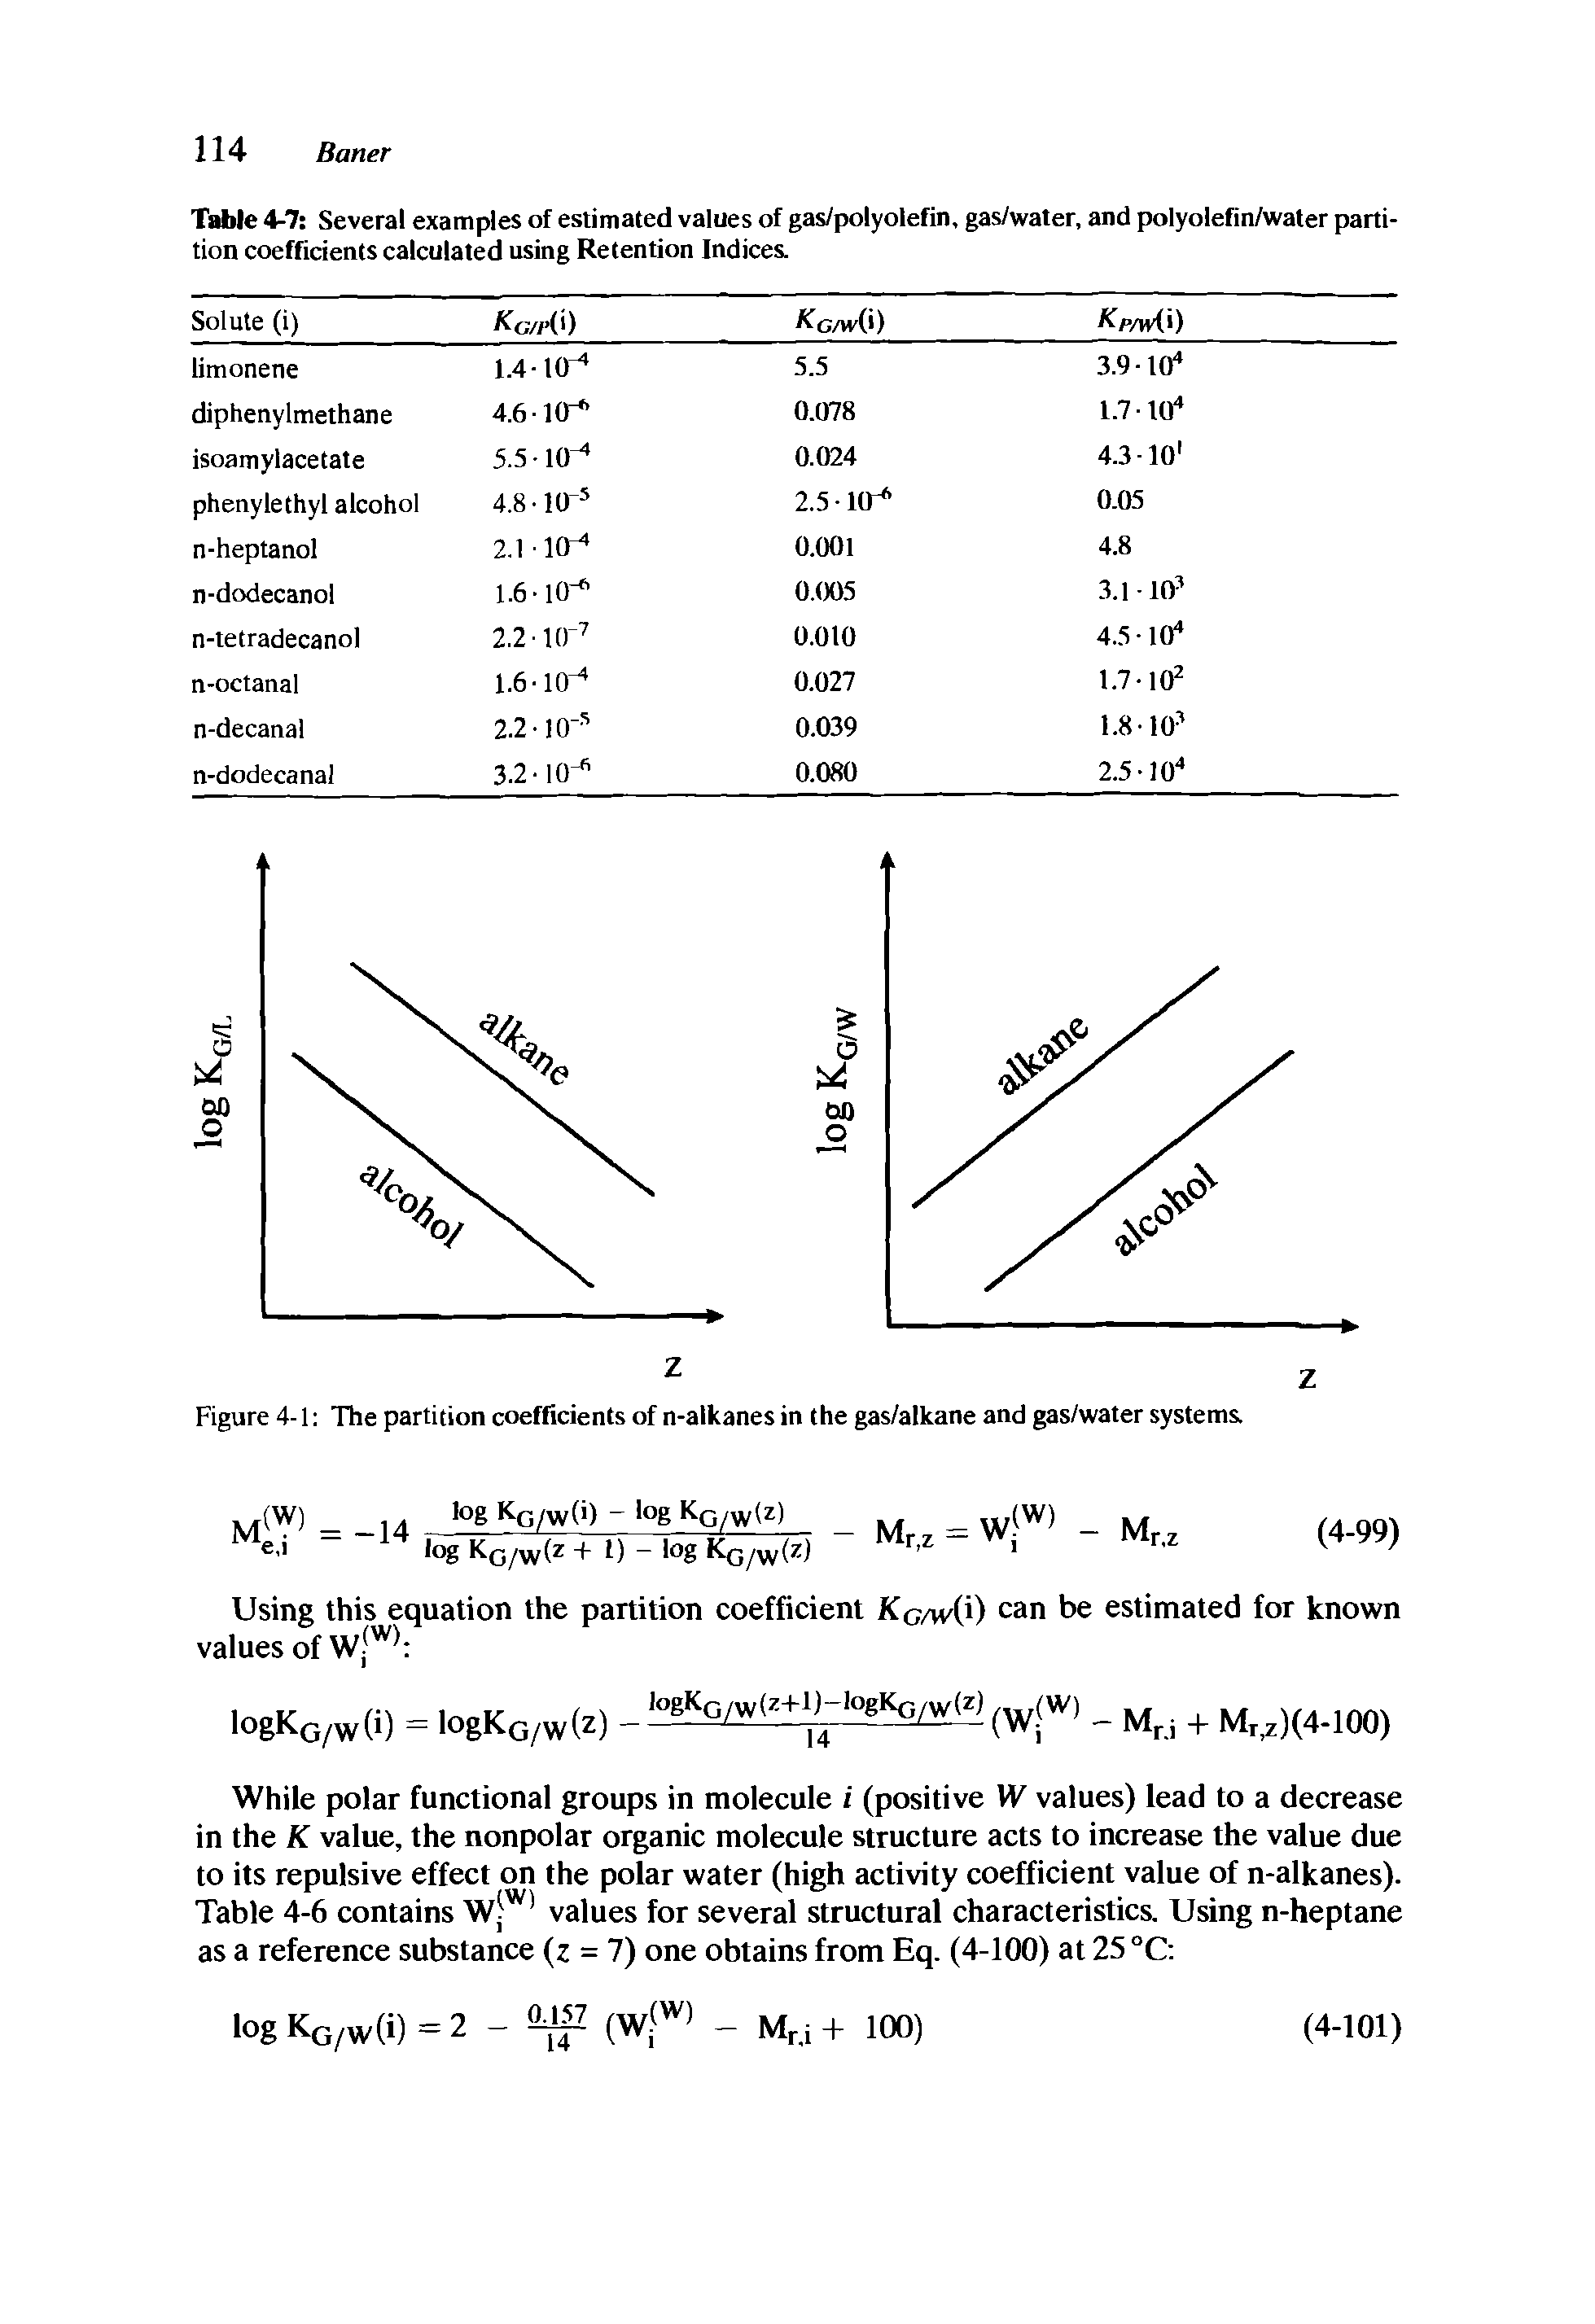 Table 4-7 Several examples of estimated values of gas/polyolefin, gas/water, and polyolefin/water partition coefficients calculated using Retention Indices.